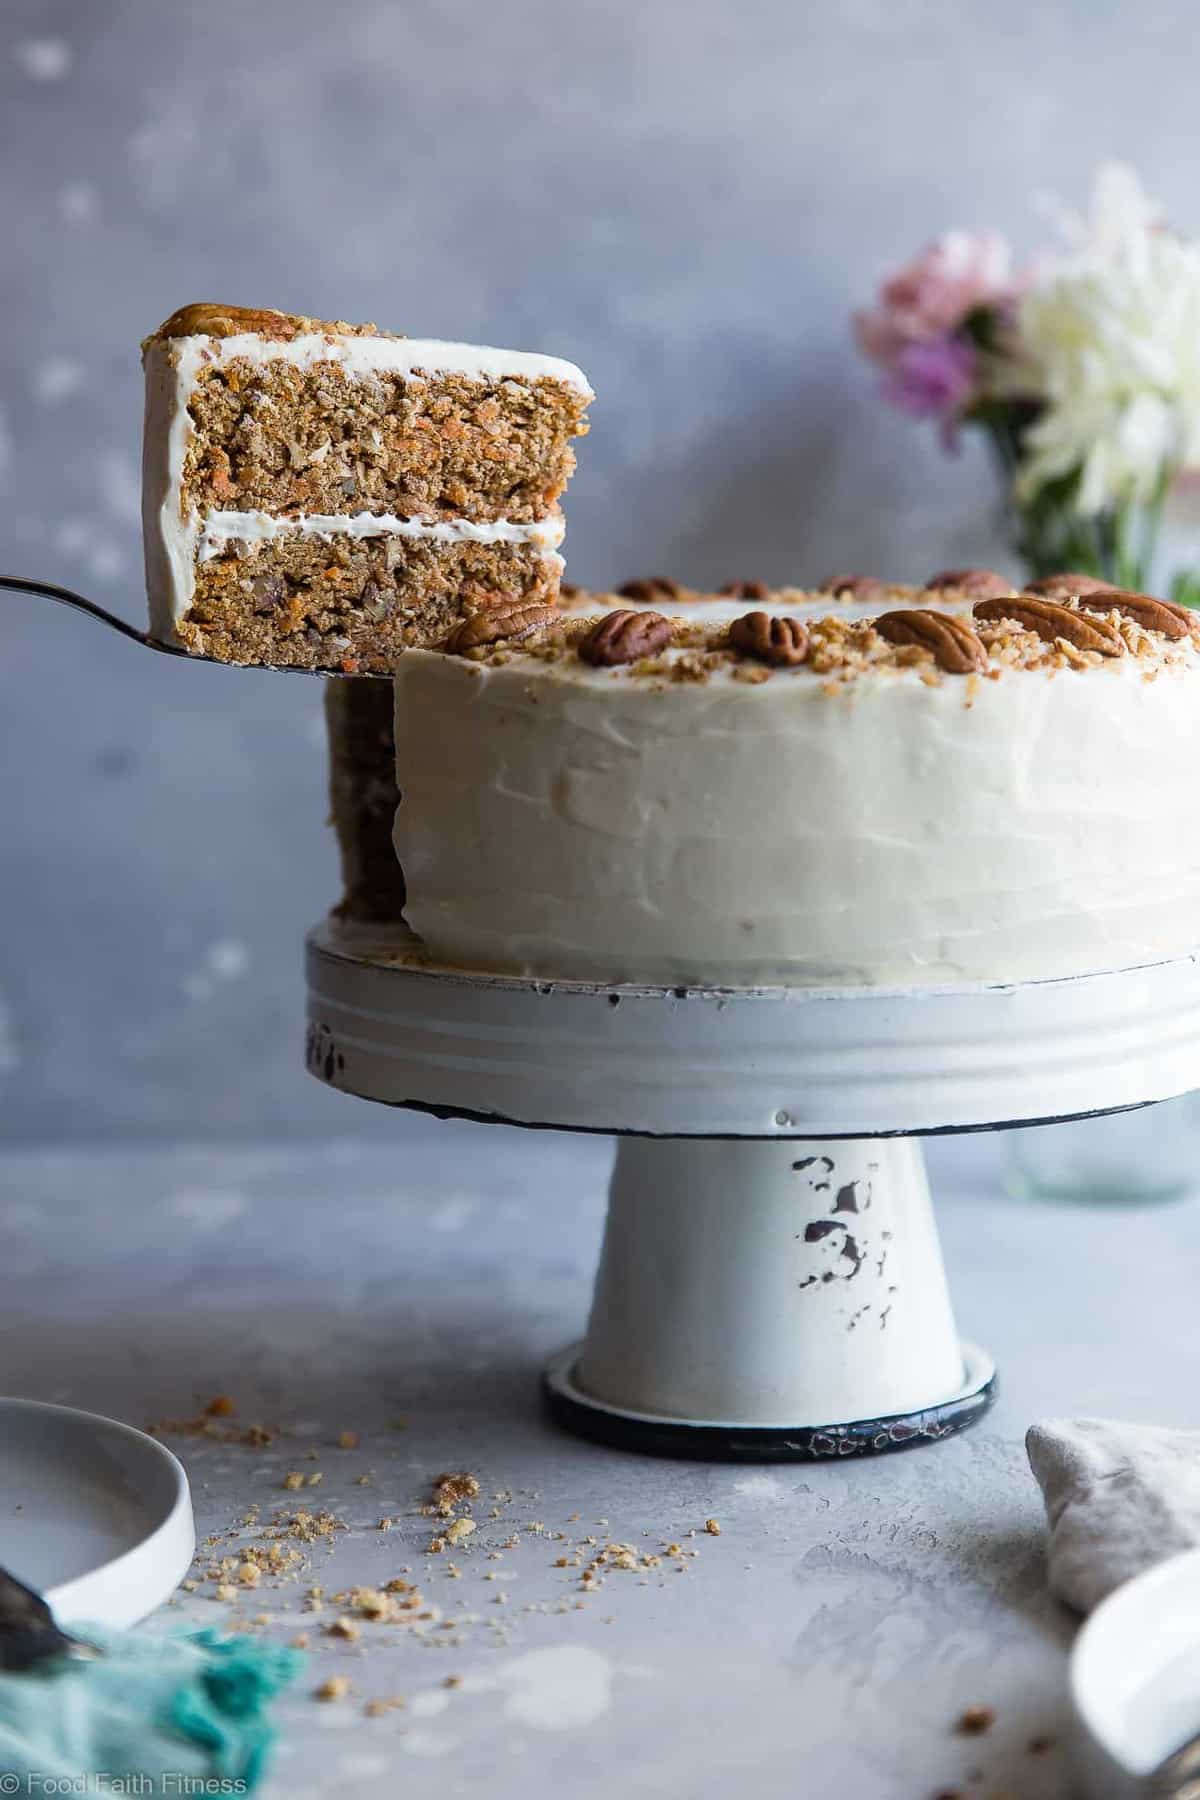 Low Carb Sugar Free Carrot Cake - this healthy, sugar free carrot cake is SO moist and tender, you'll never know it's gluten, oil and butter free, made with Greek yogurt, only 170 calories and 5 WW Freestyle points! Perfect for Easter! | #Foodfaithfitness | #Lowcarb #sugarfree #glutenfree #carrotcake #easter